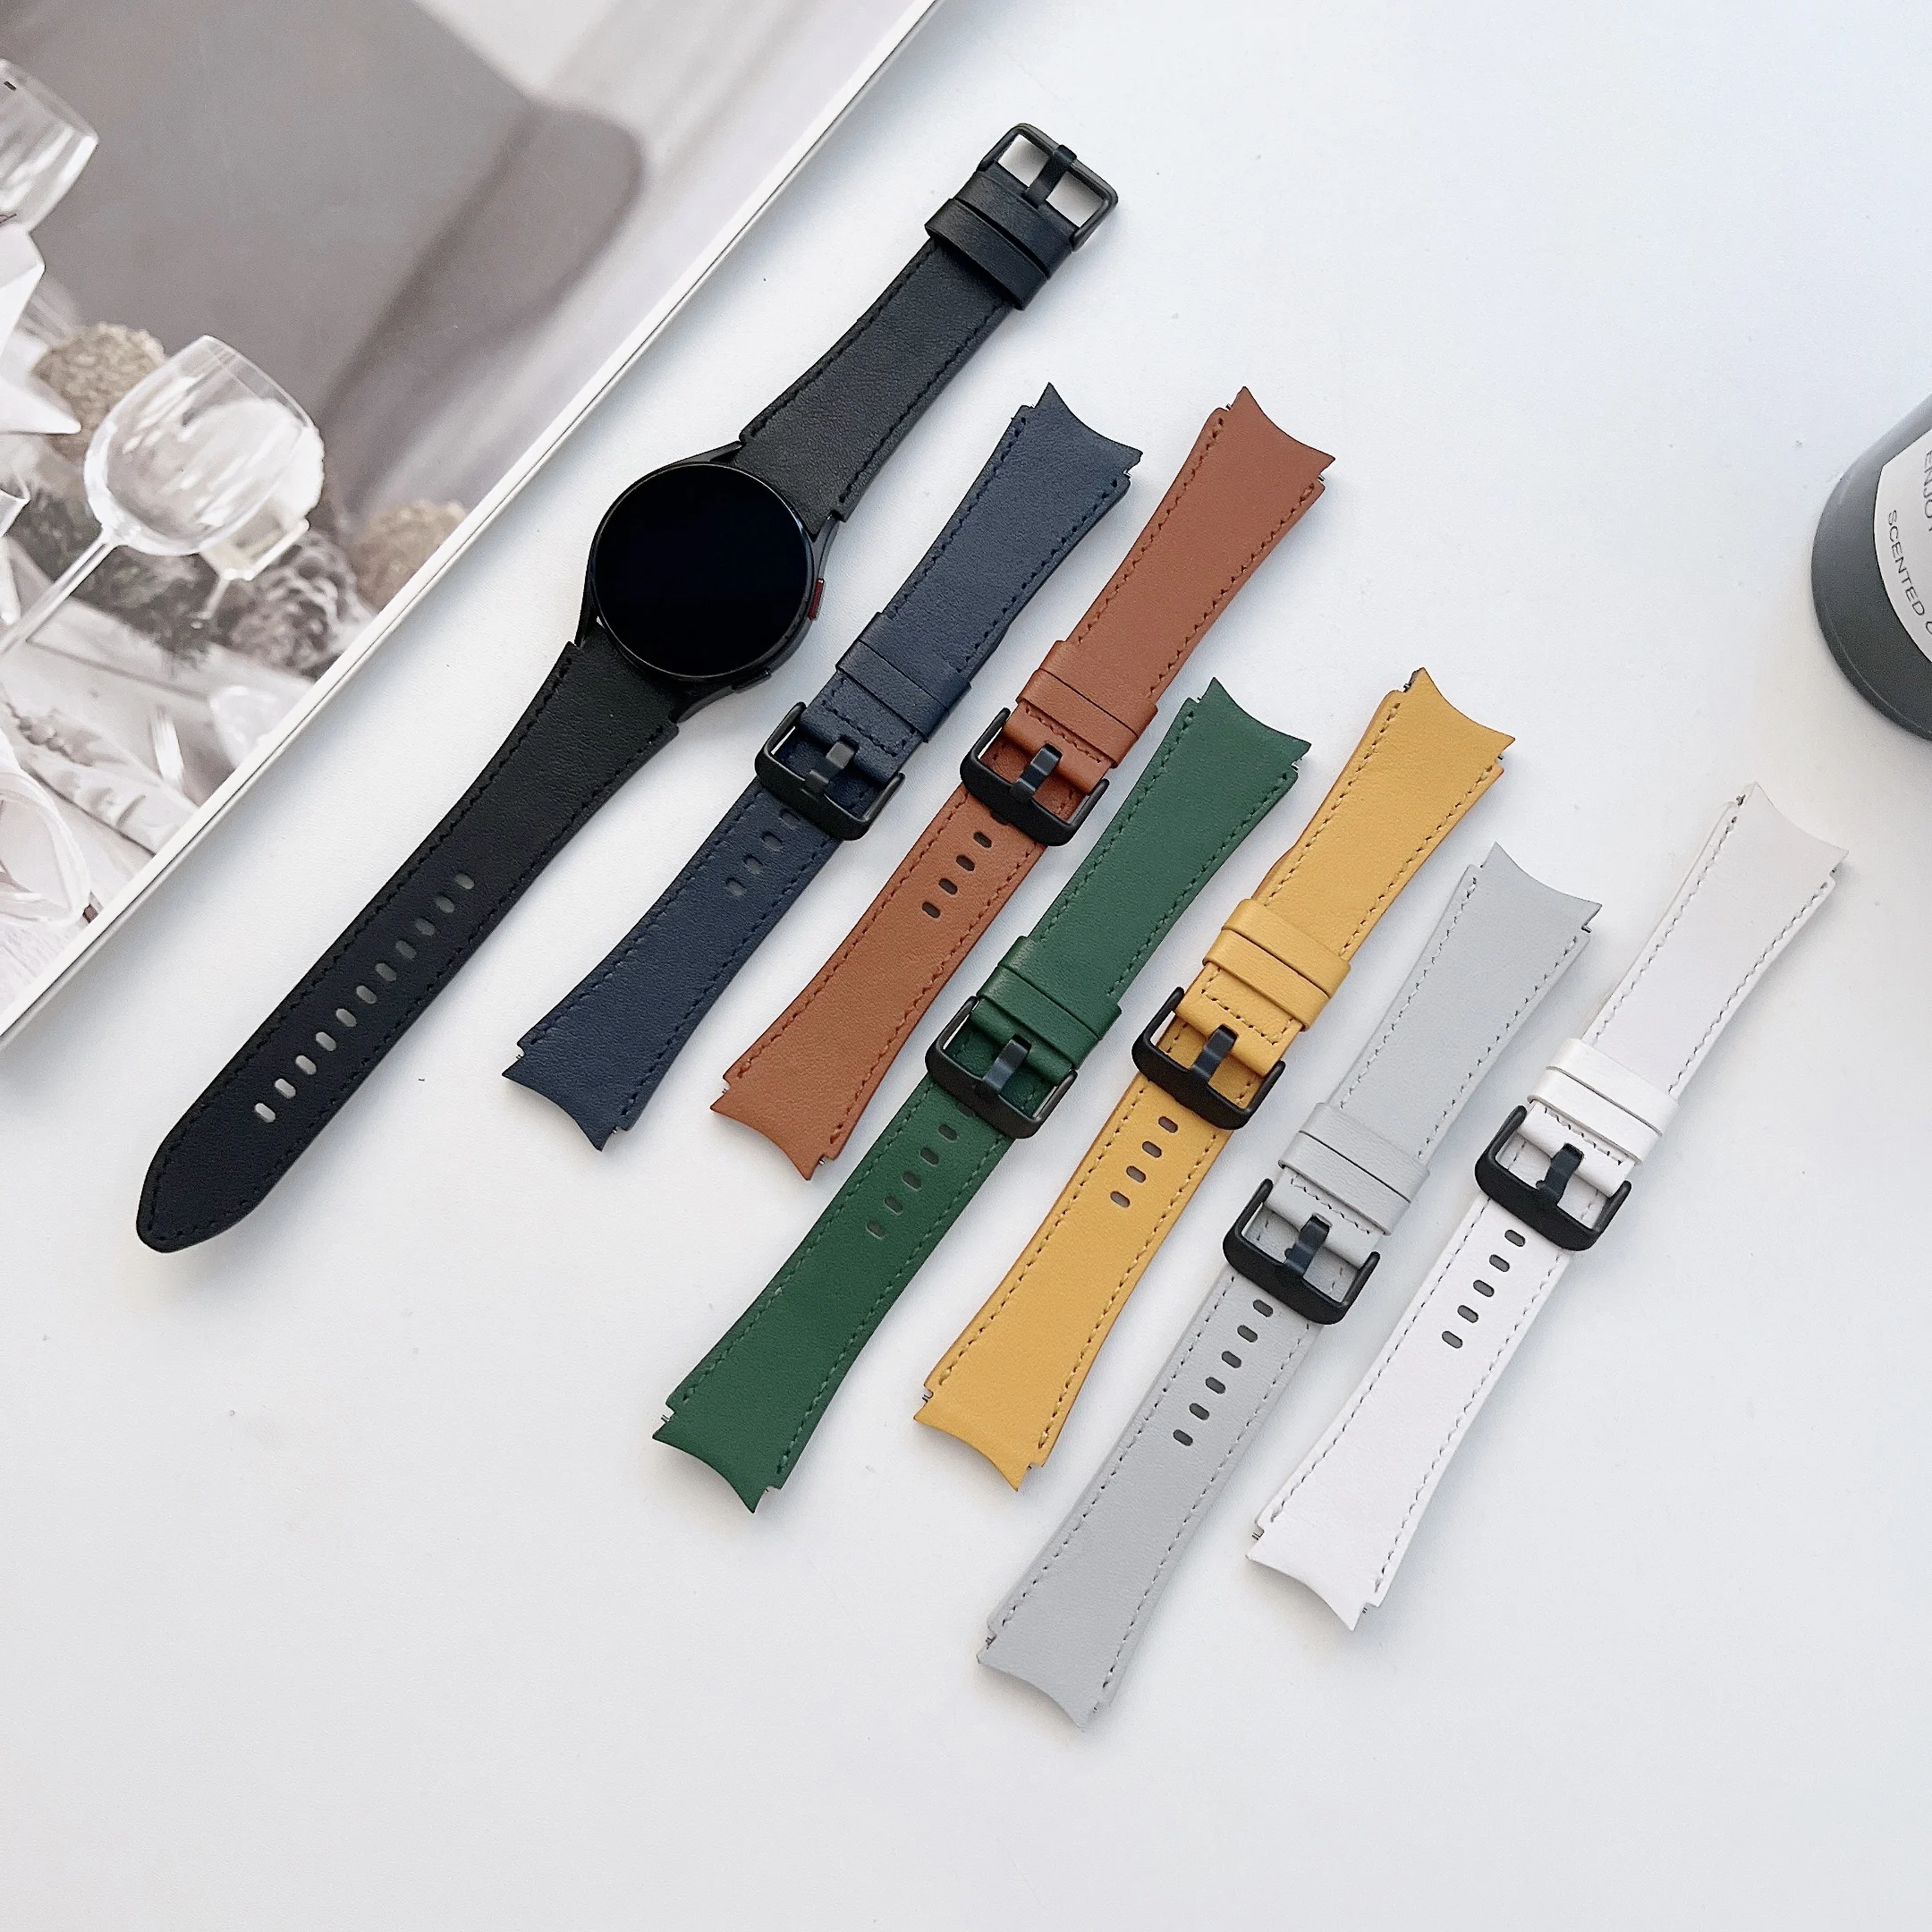 

20mm 22mm leather band for samsung galaxy watch 3/4 BIP 41mm classic 44mm active2 strap bracelet huawei gt2 gear s3 45 42mm 46mm